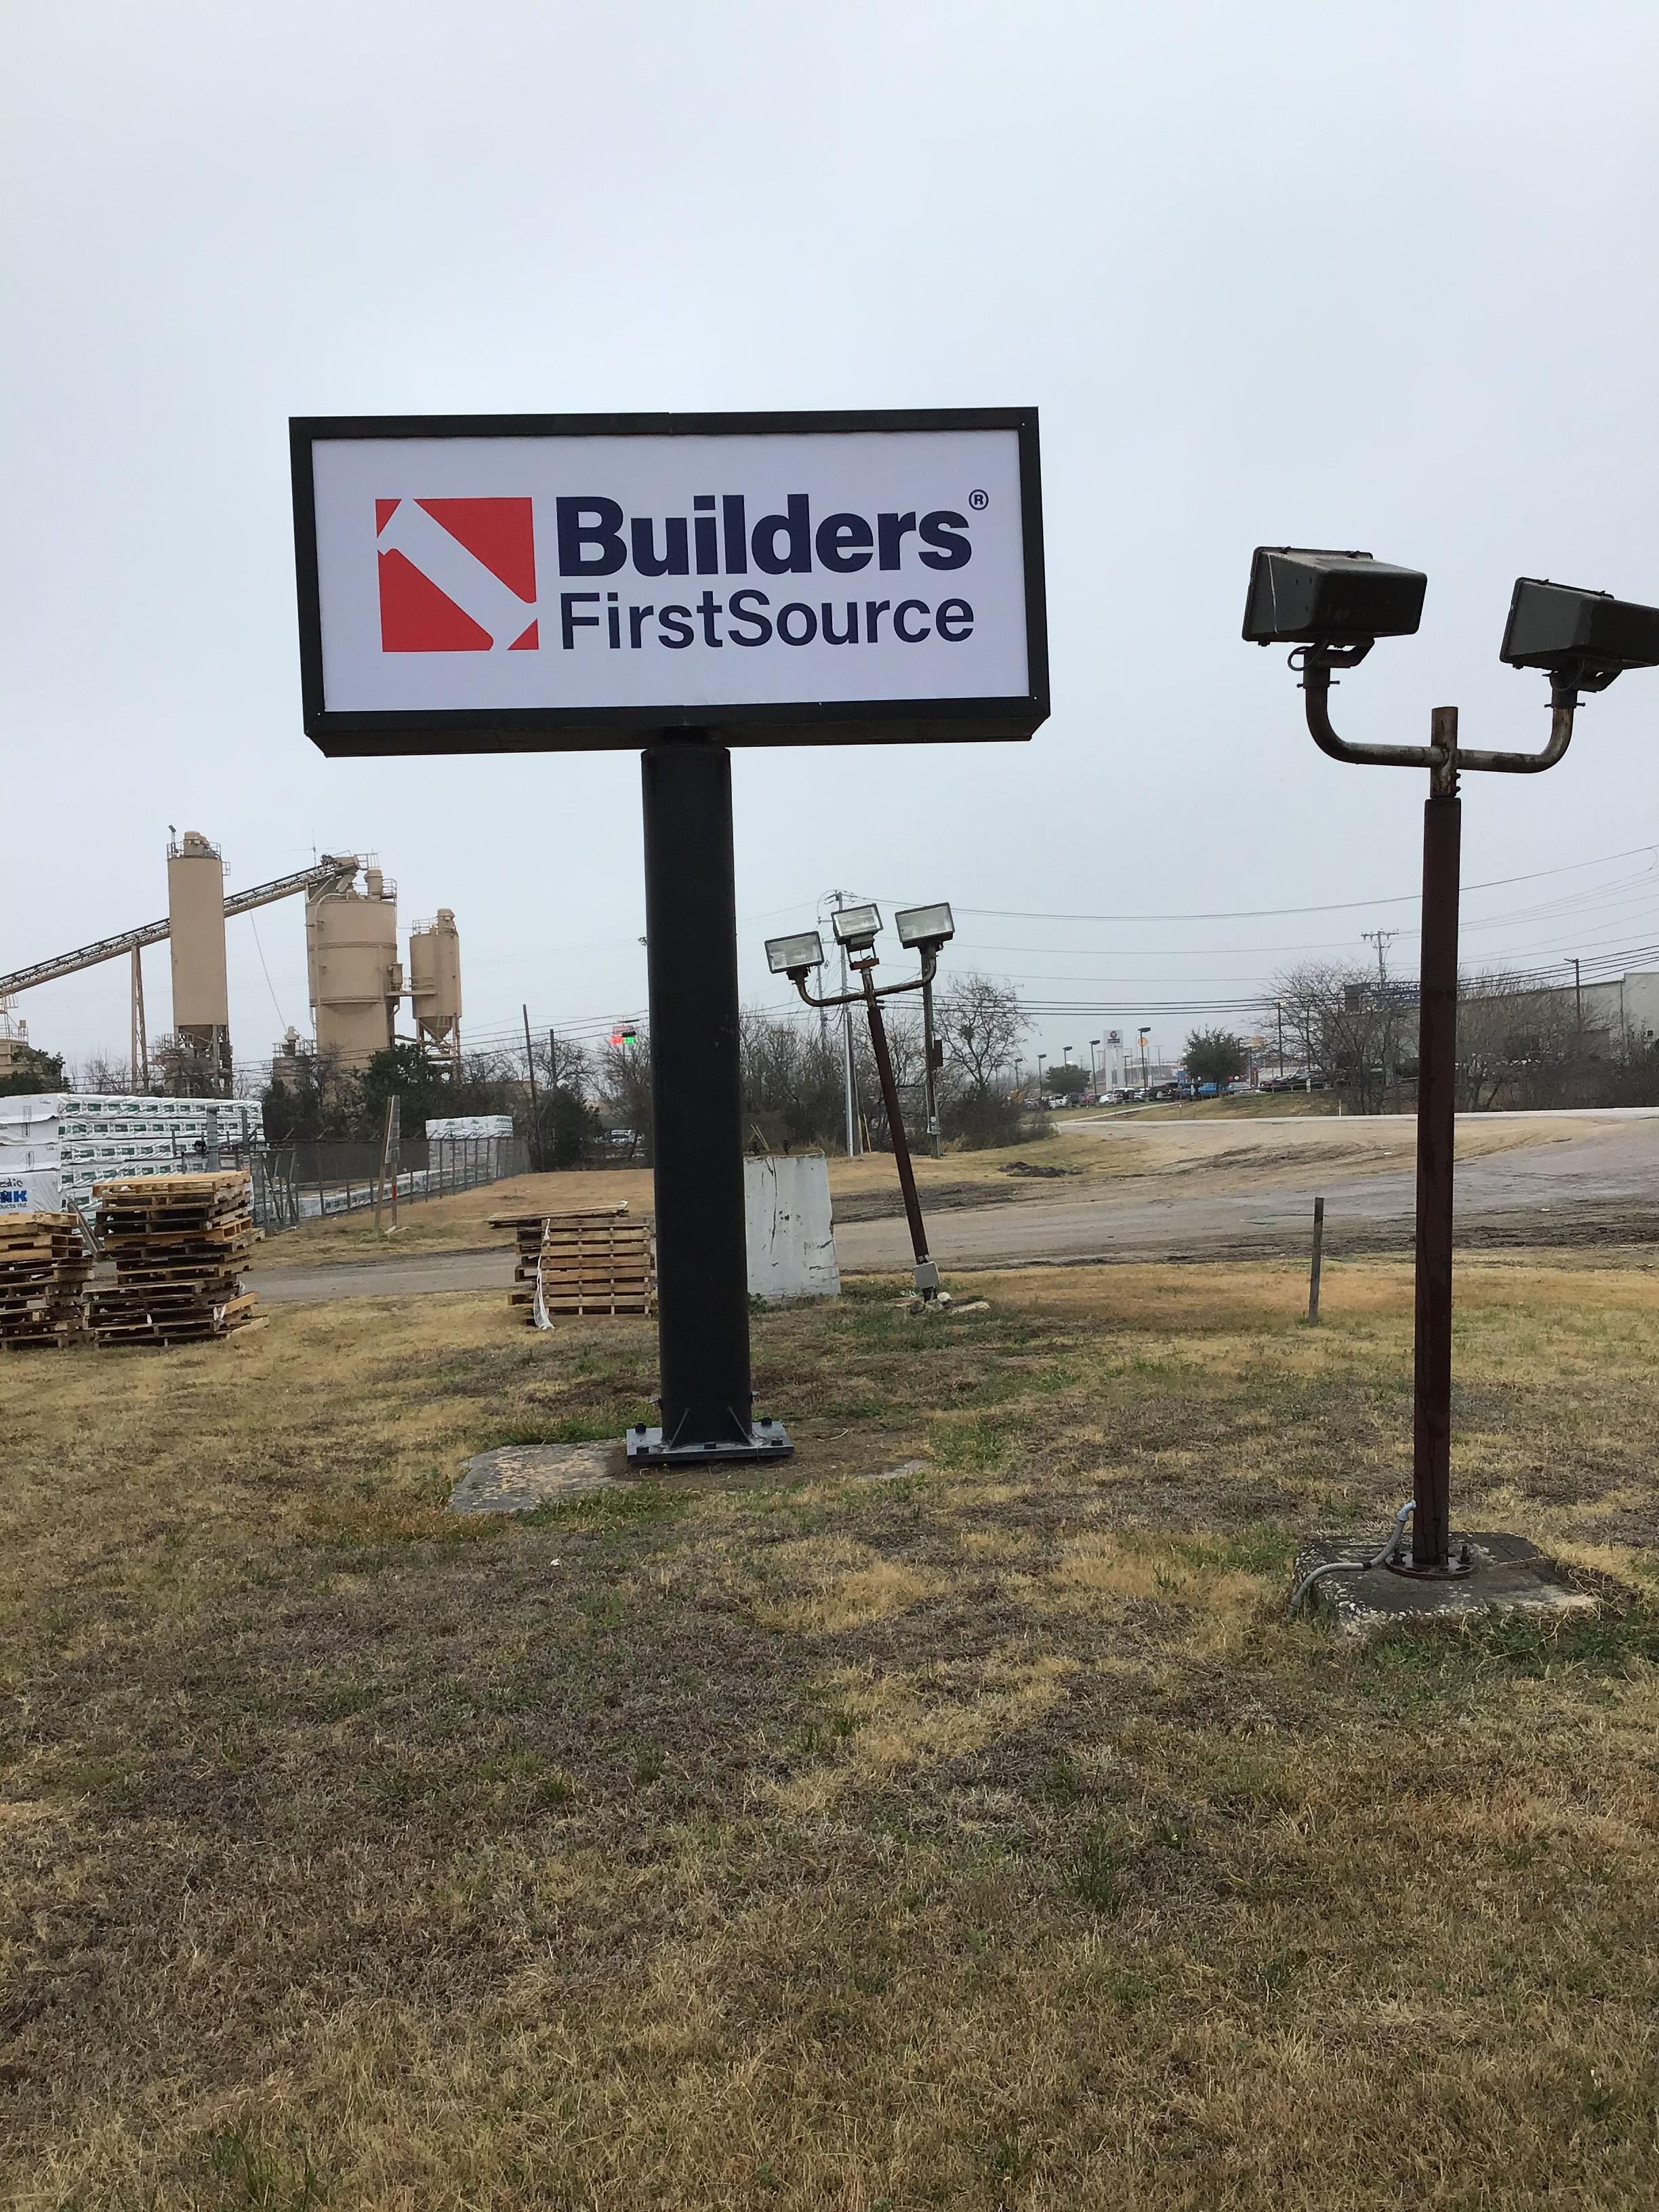 Builders FirstSource lumber yard pole sign in New Braunfels, TX.